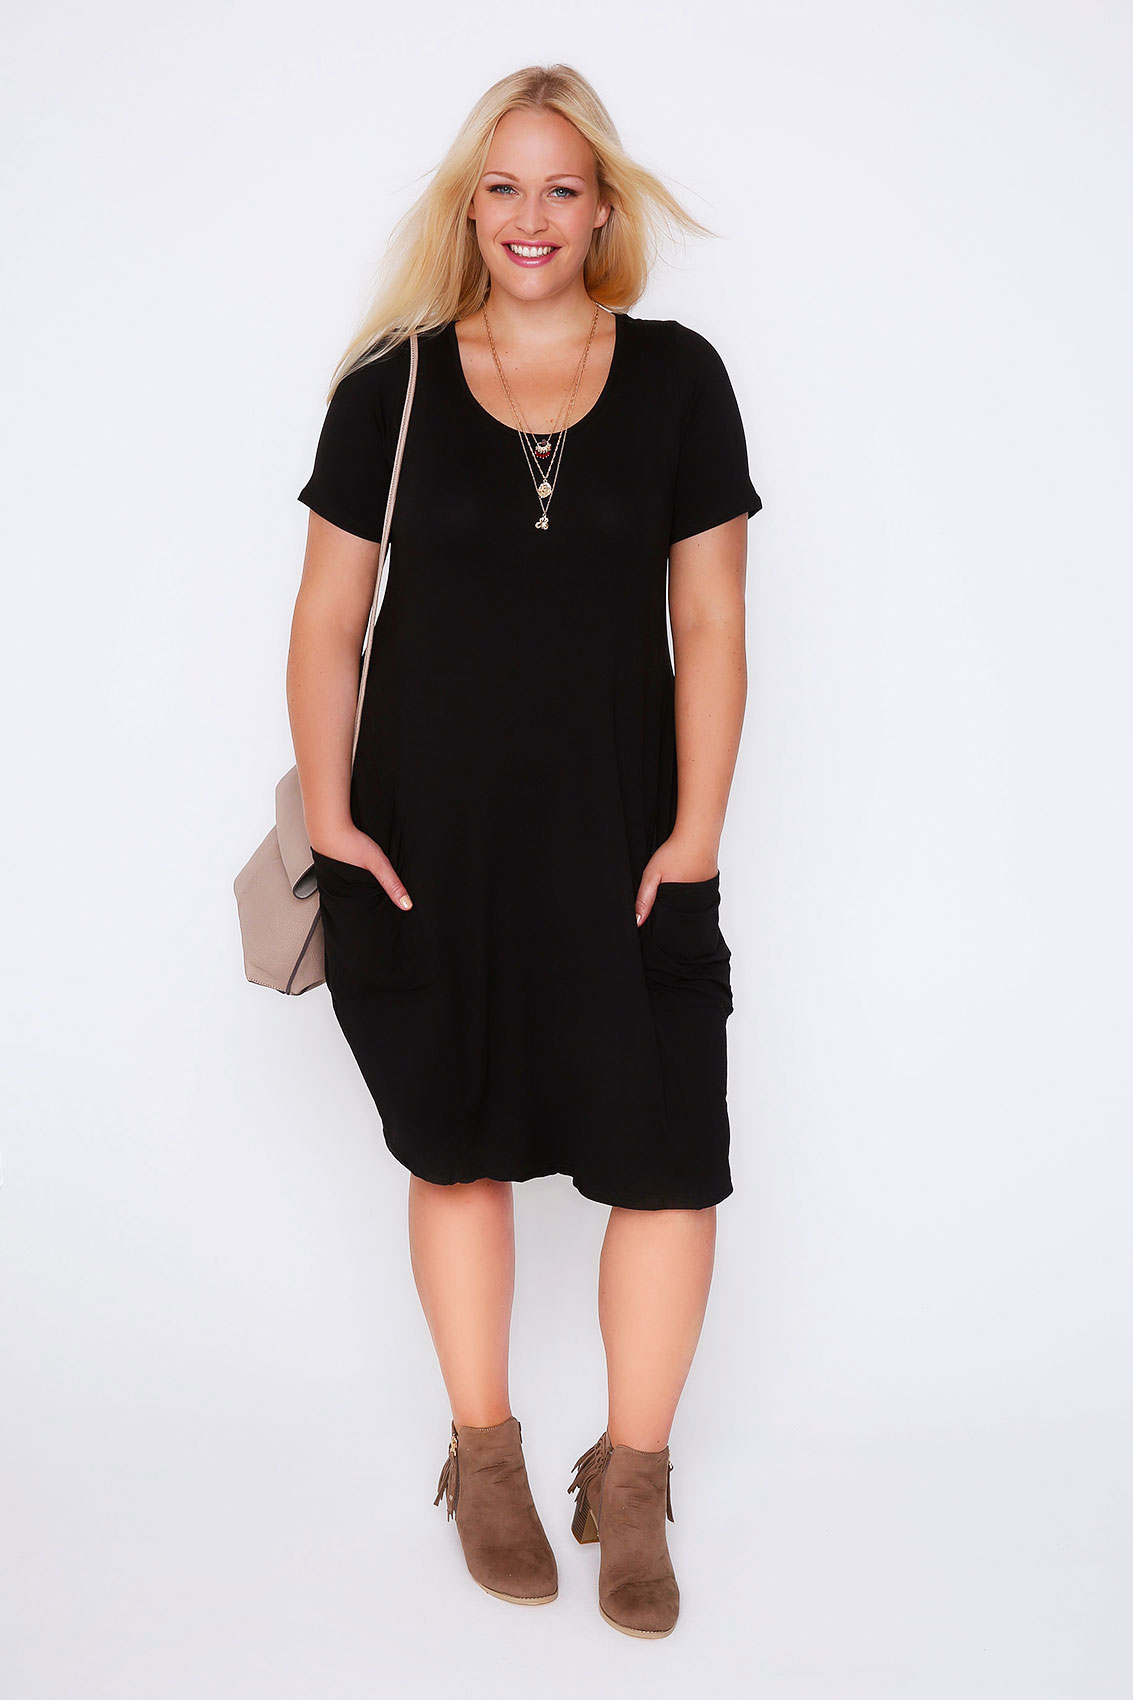 jersey dress with pockets